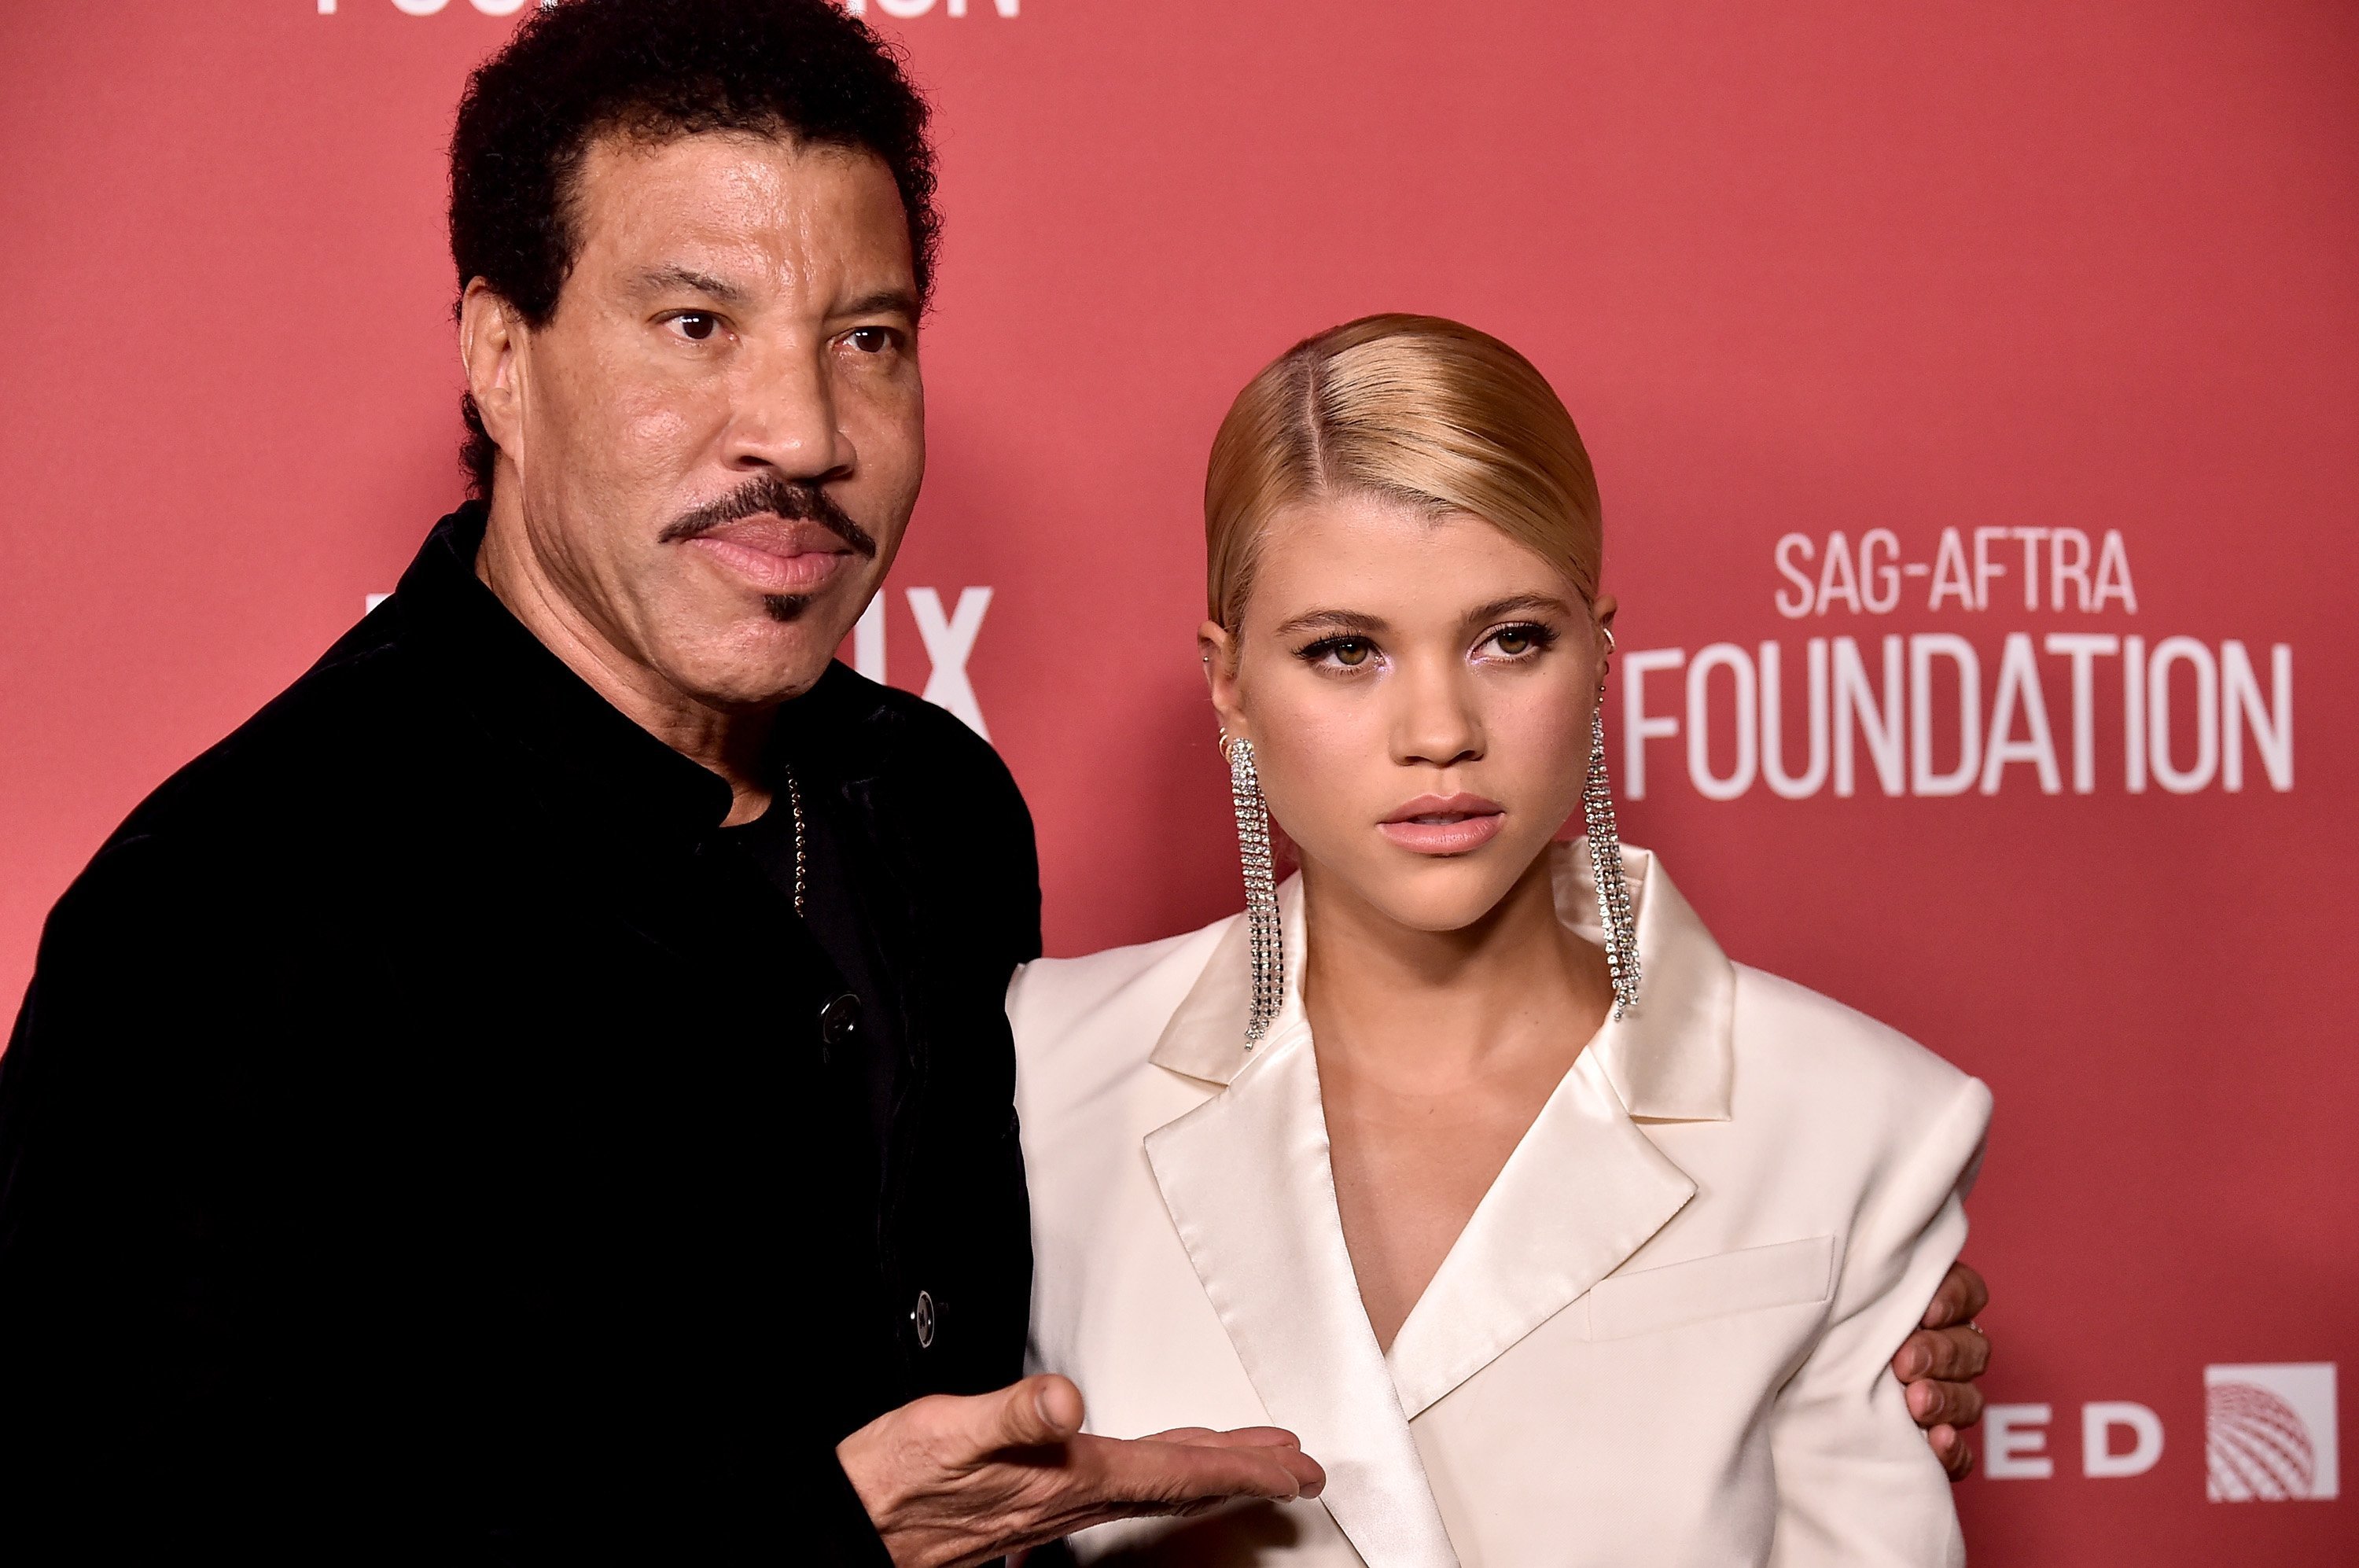 Lionel Richie and Sofia Richie attend the SAG-AFTRA Foundation Patron of the Artists Awards 2017 at the Wallis Annenberg Center for the Performing Arts on November 9, 2017 in Beverly Hills, California. | Photo: GettyImages/Global Images of Ukraine